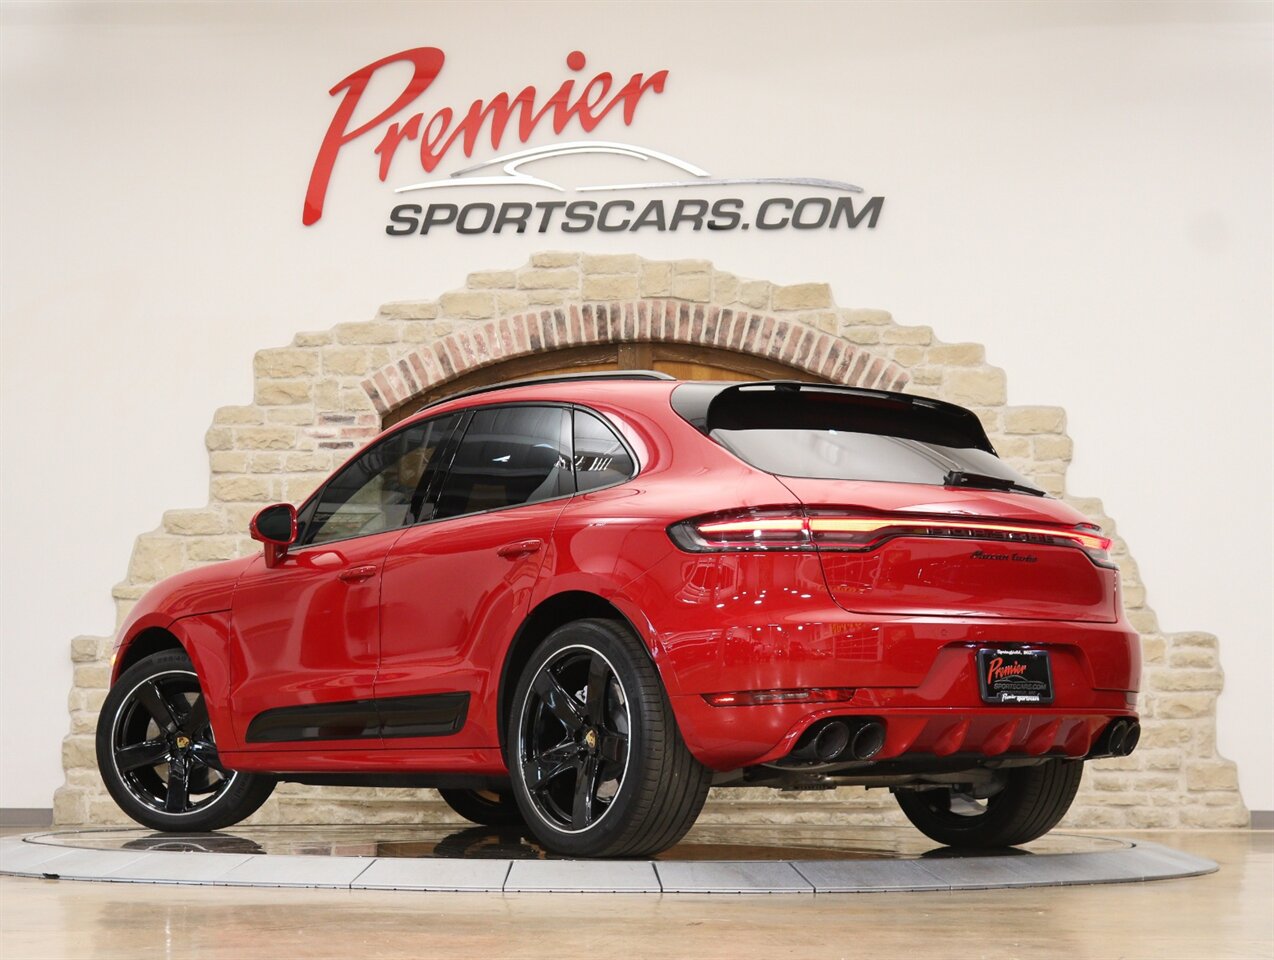 2020 Porsche Macan Turbo  (Lots of options MSRP $124,740) - Photo 9 - Springfield, MO 65802